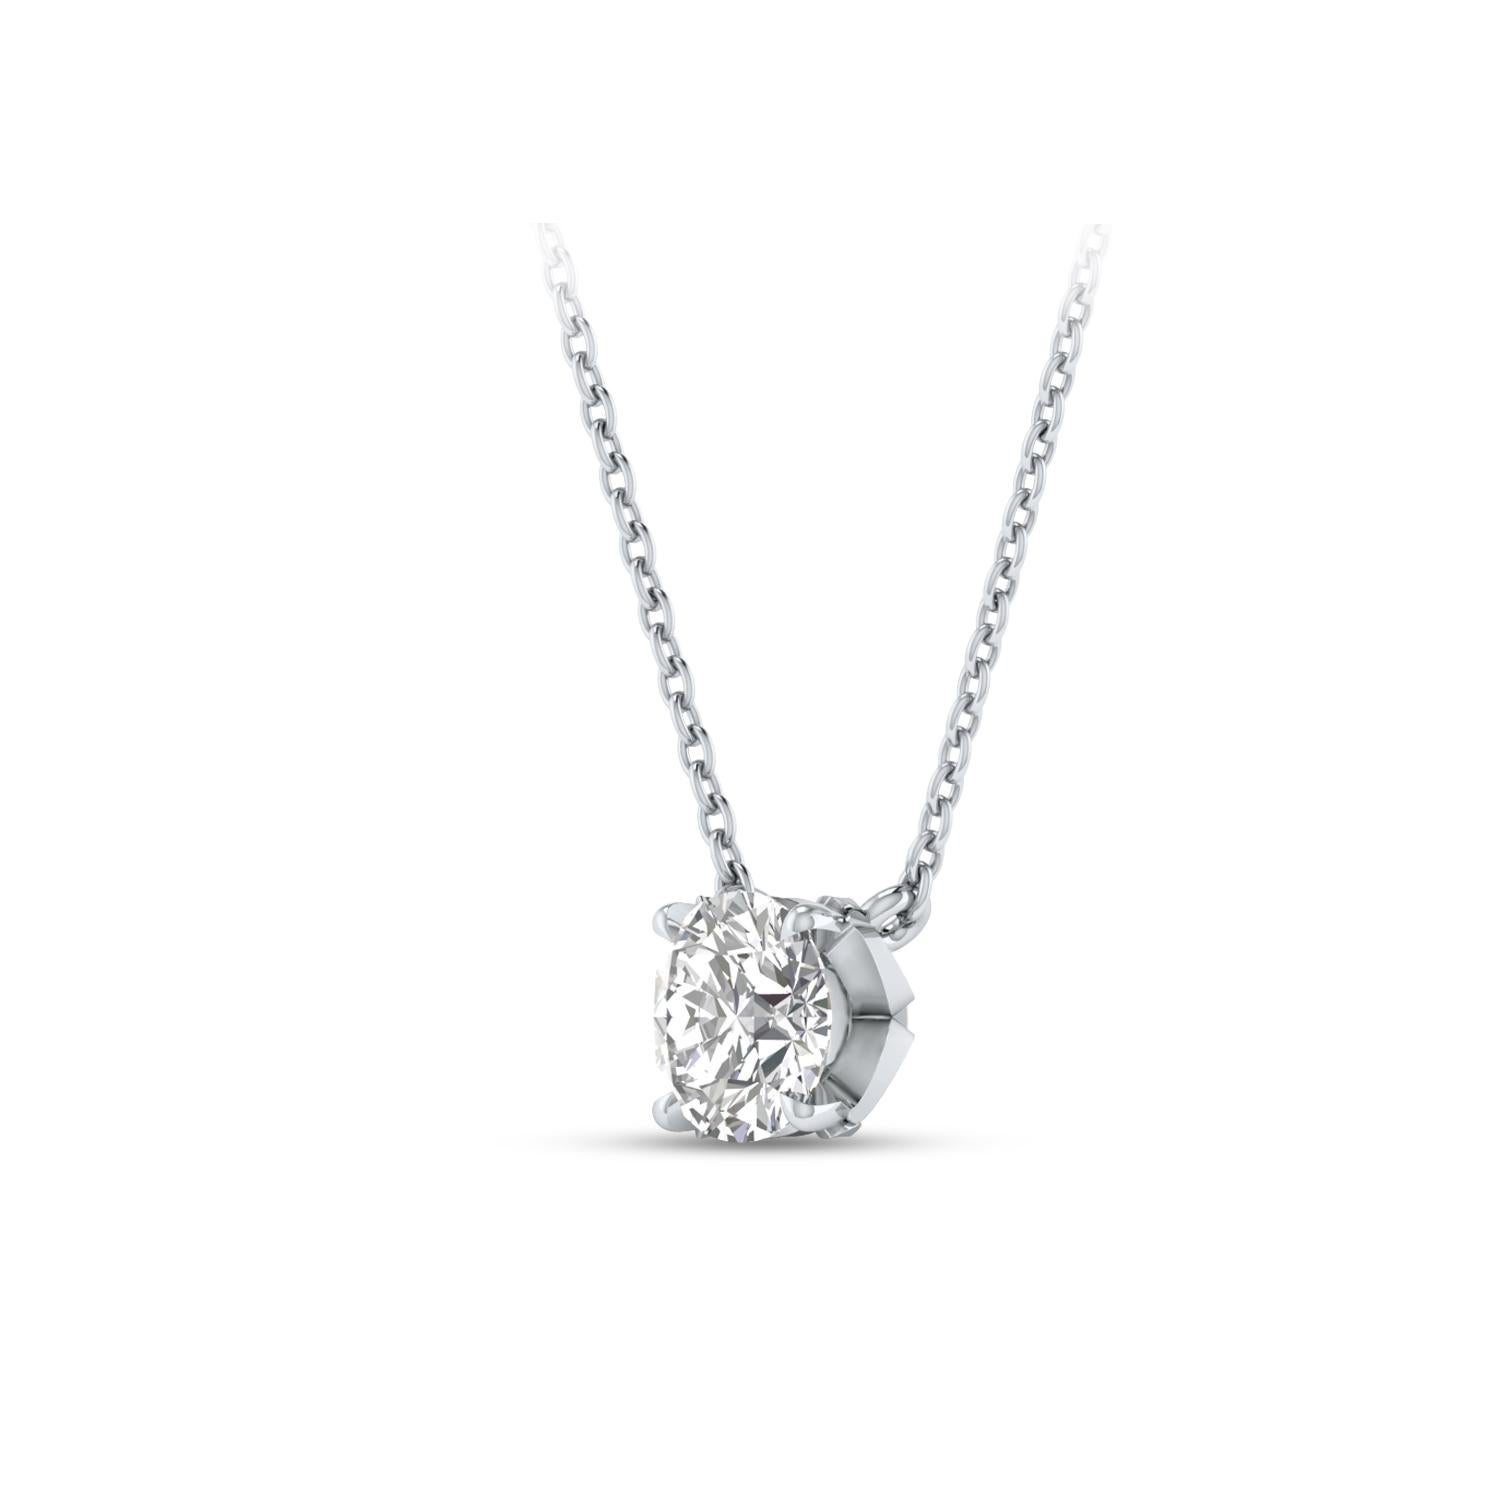 This solitaire diamond necklace features a single, brilliant-cut 0.33 carat diamond in prong setting crafted in 18 KT white gold. This elegant necklace includes 120-inch cable chain with extender at 18-inch.  

(Carat weights may vary slightly due